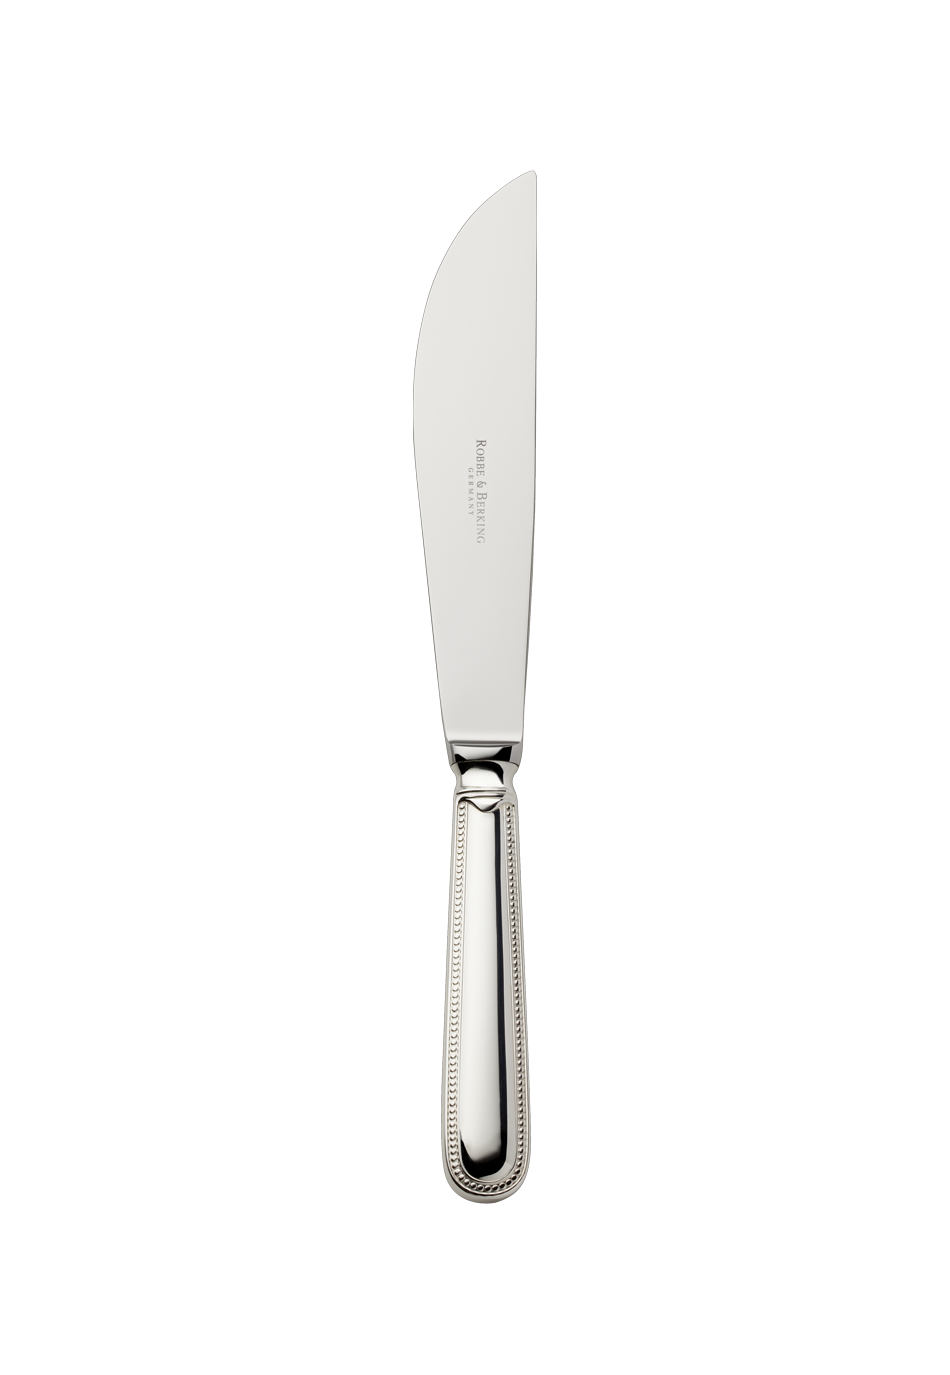 Französisch-Perl Carving Knife (150g massive silverplated)